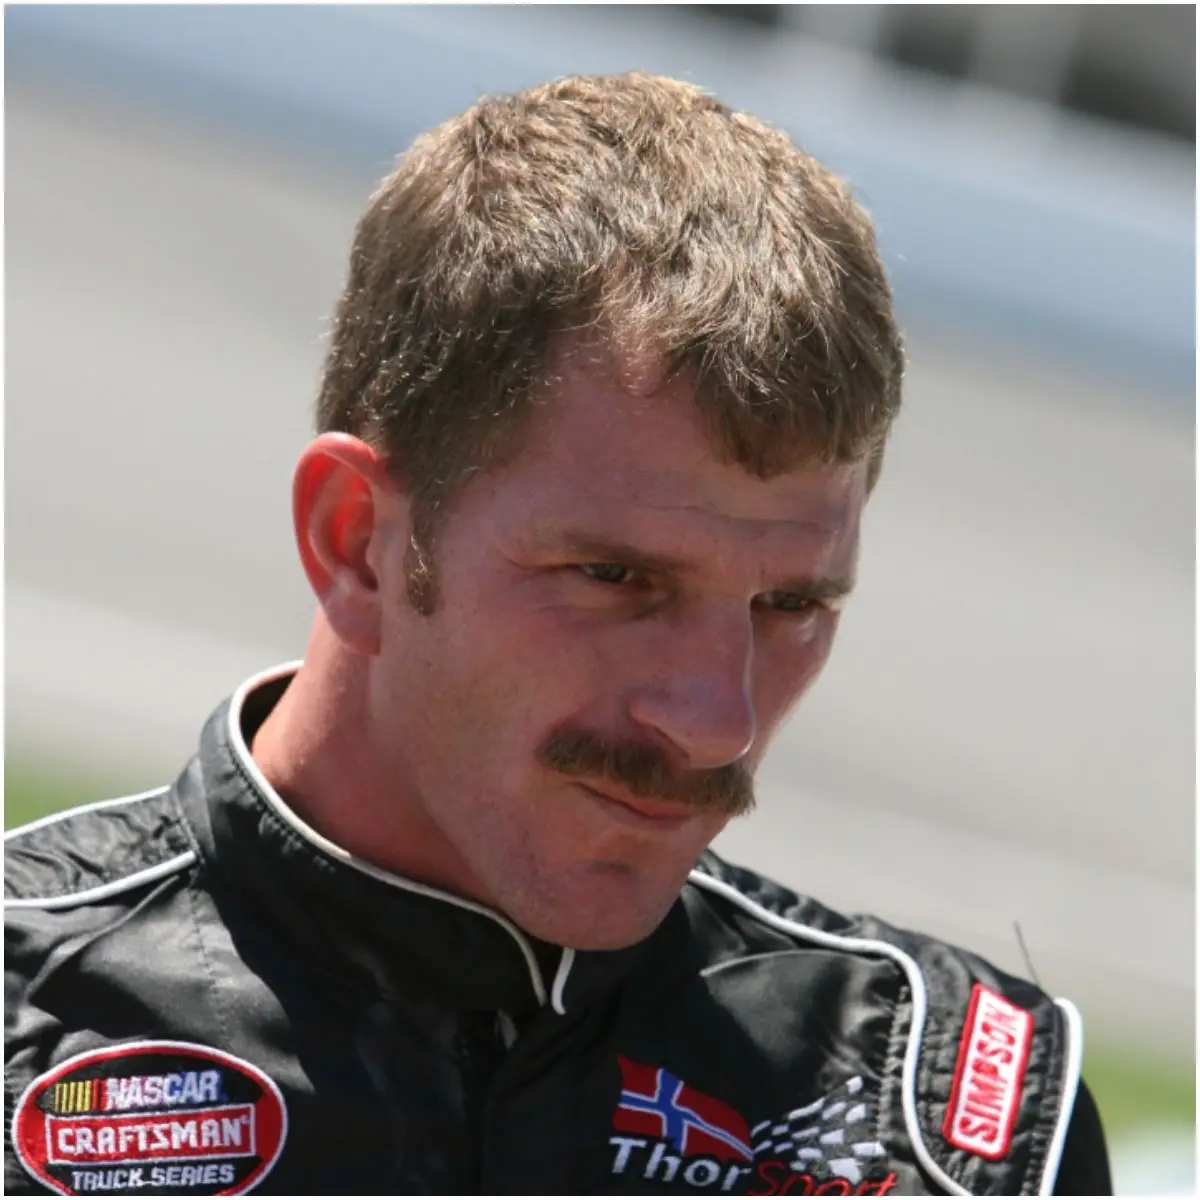 what is the net worth of Kerry Earnhardt